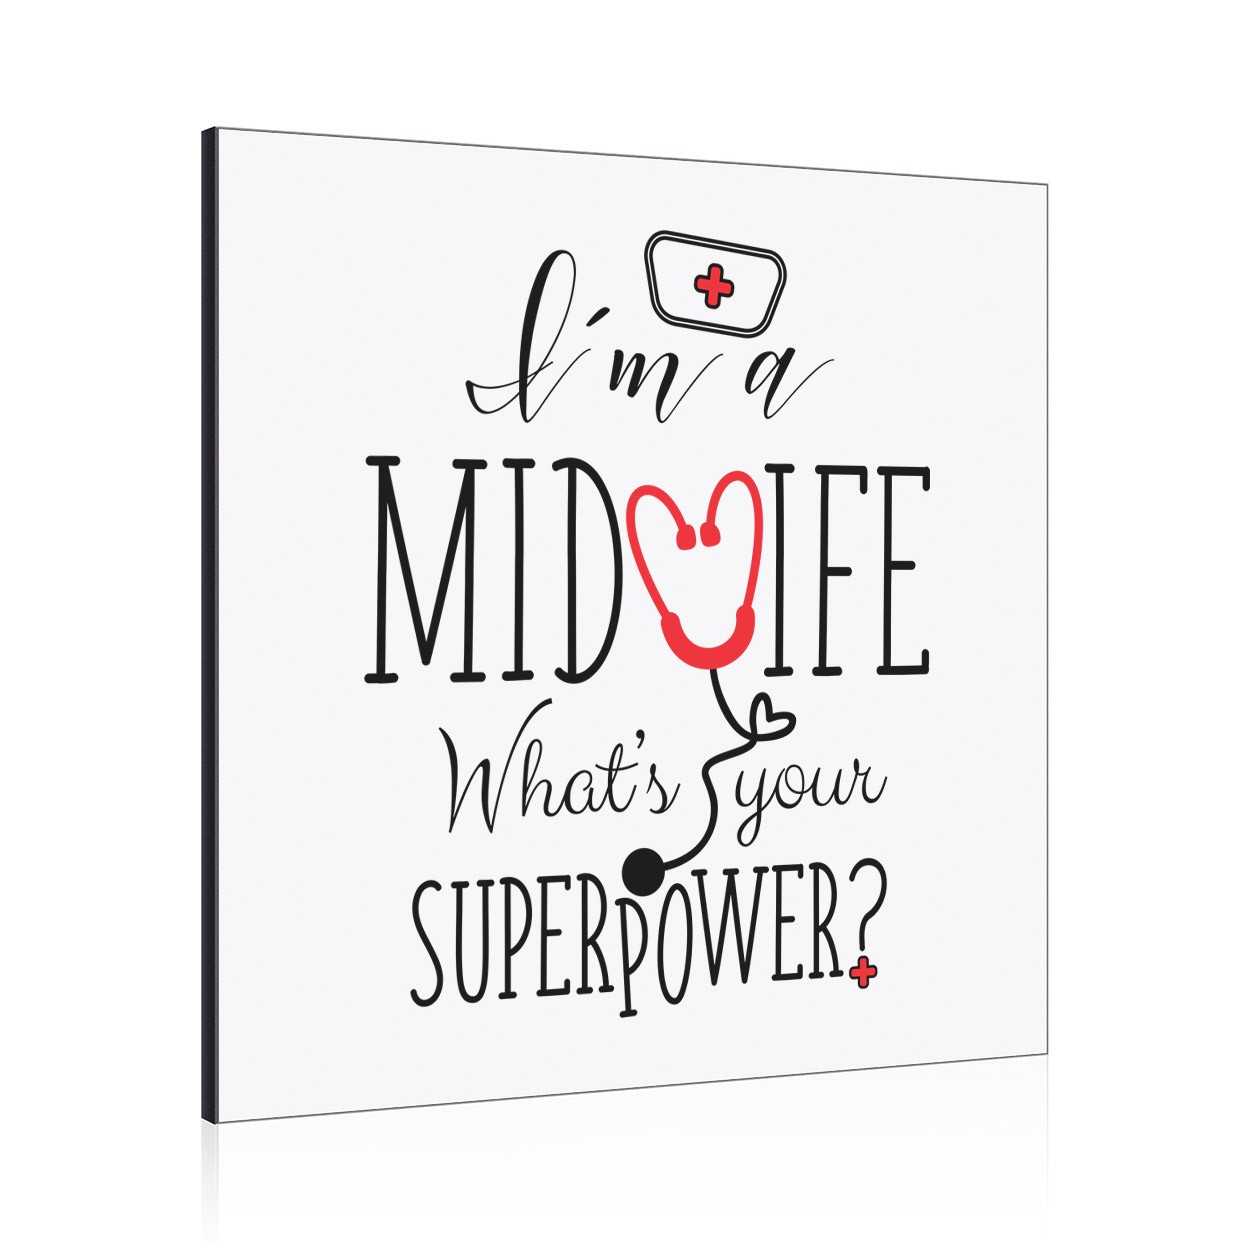 I'm A Midwife What's Your Superpower Wall Art Panel